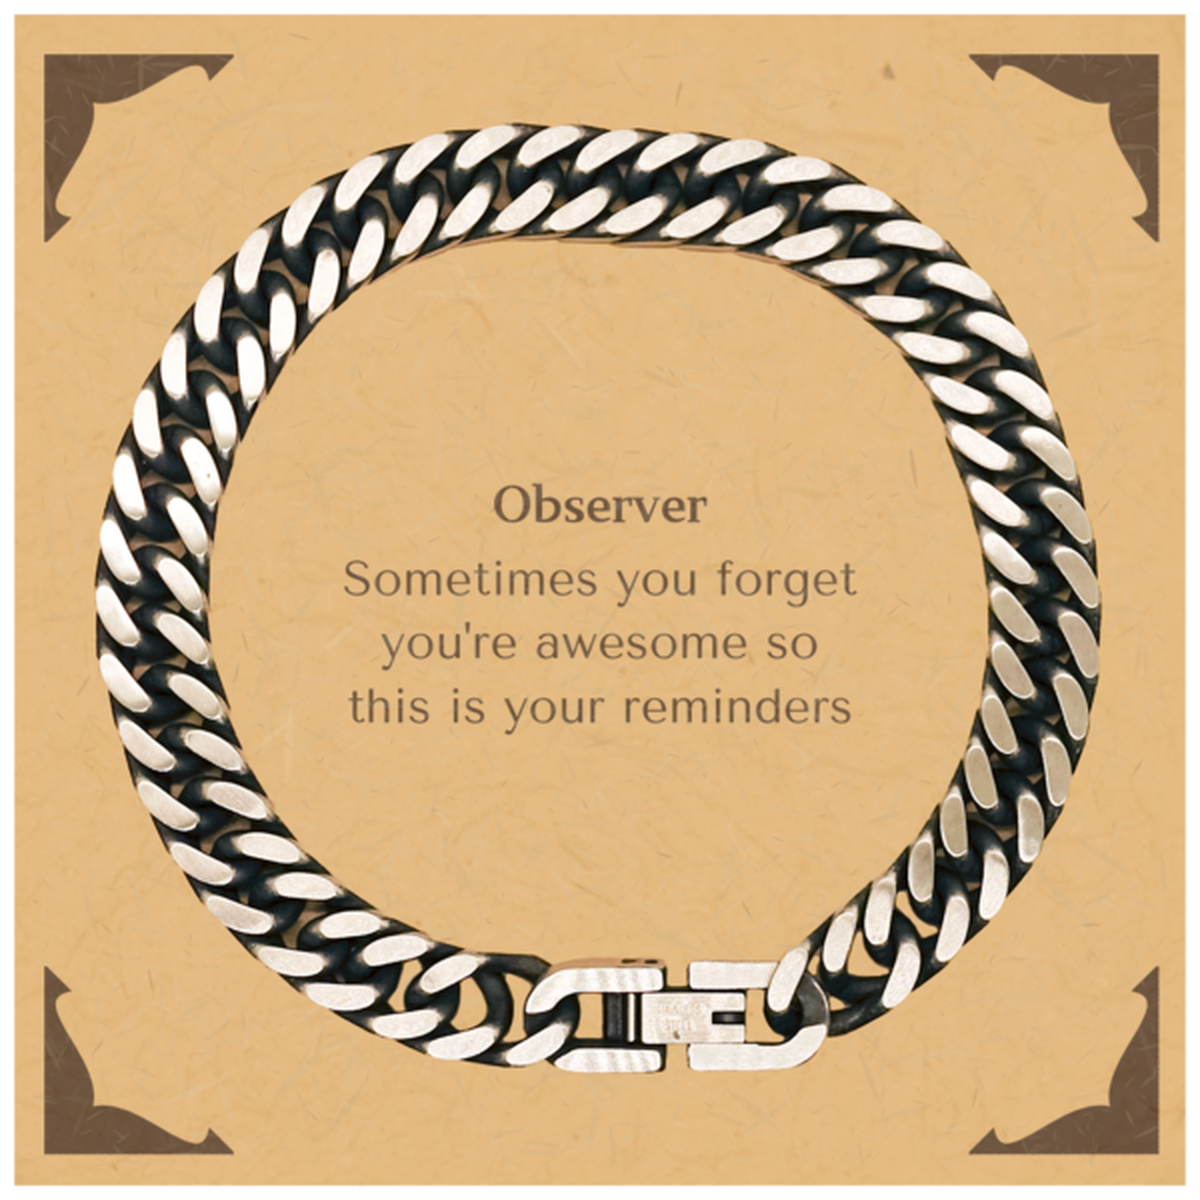 Sentimental Observer Cuban Link Chain Bracelet, Observer Sometimes you forget you're awesome so this is your reminders, Graduation Christmas Birthday Gifts for Observer, Men, Women, Coworkers